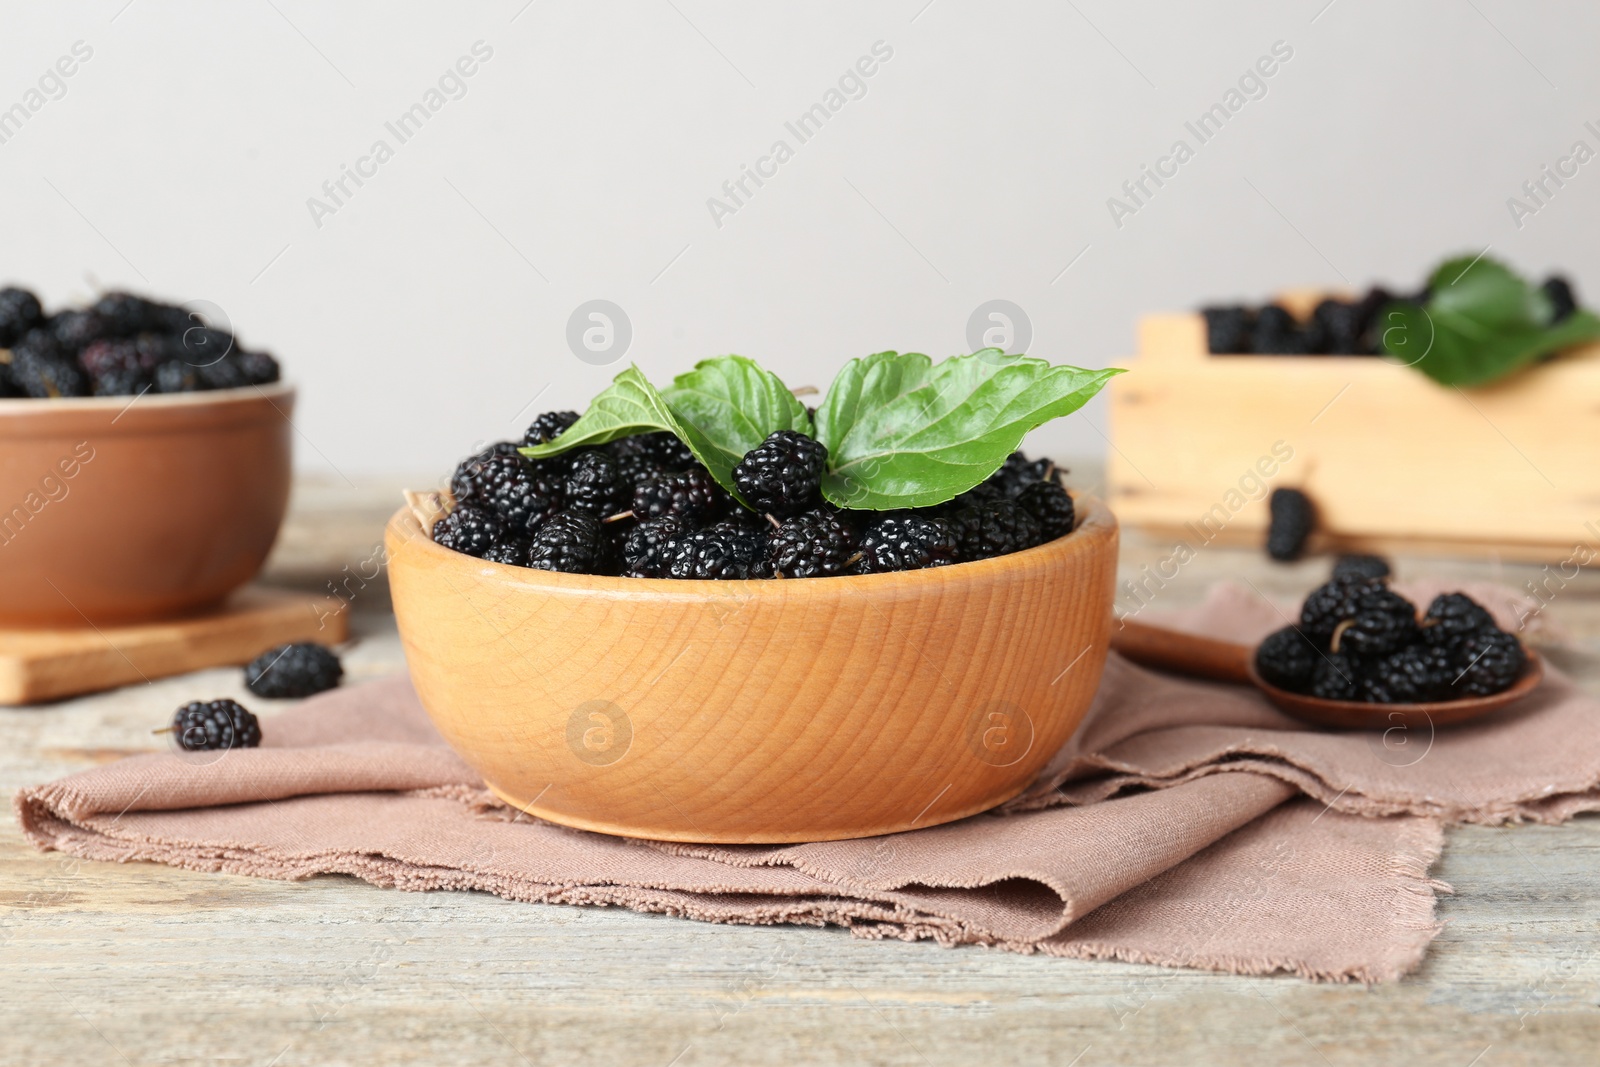 Photo of Bowl of delicious ripe black mulberries on wooden table